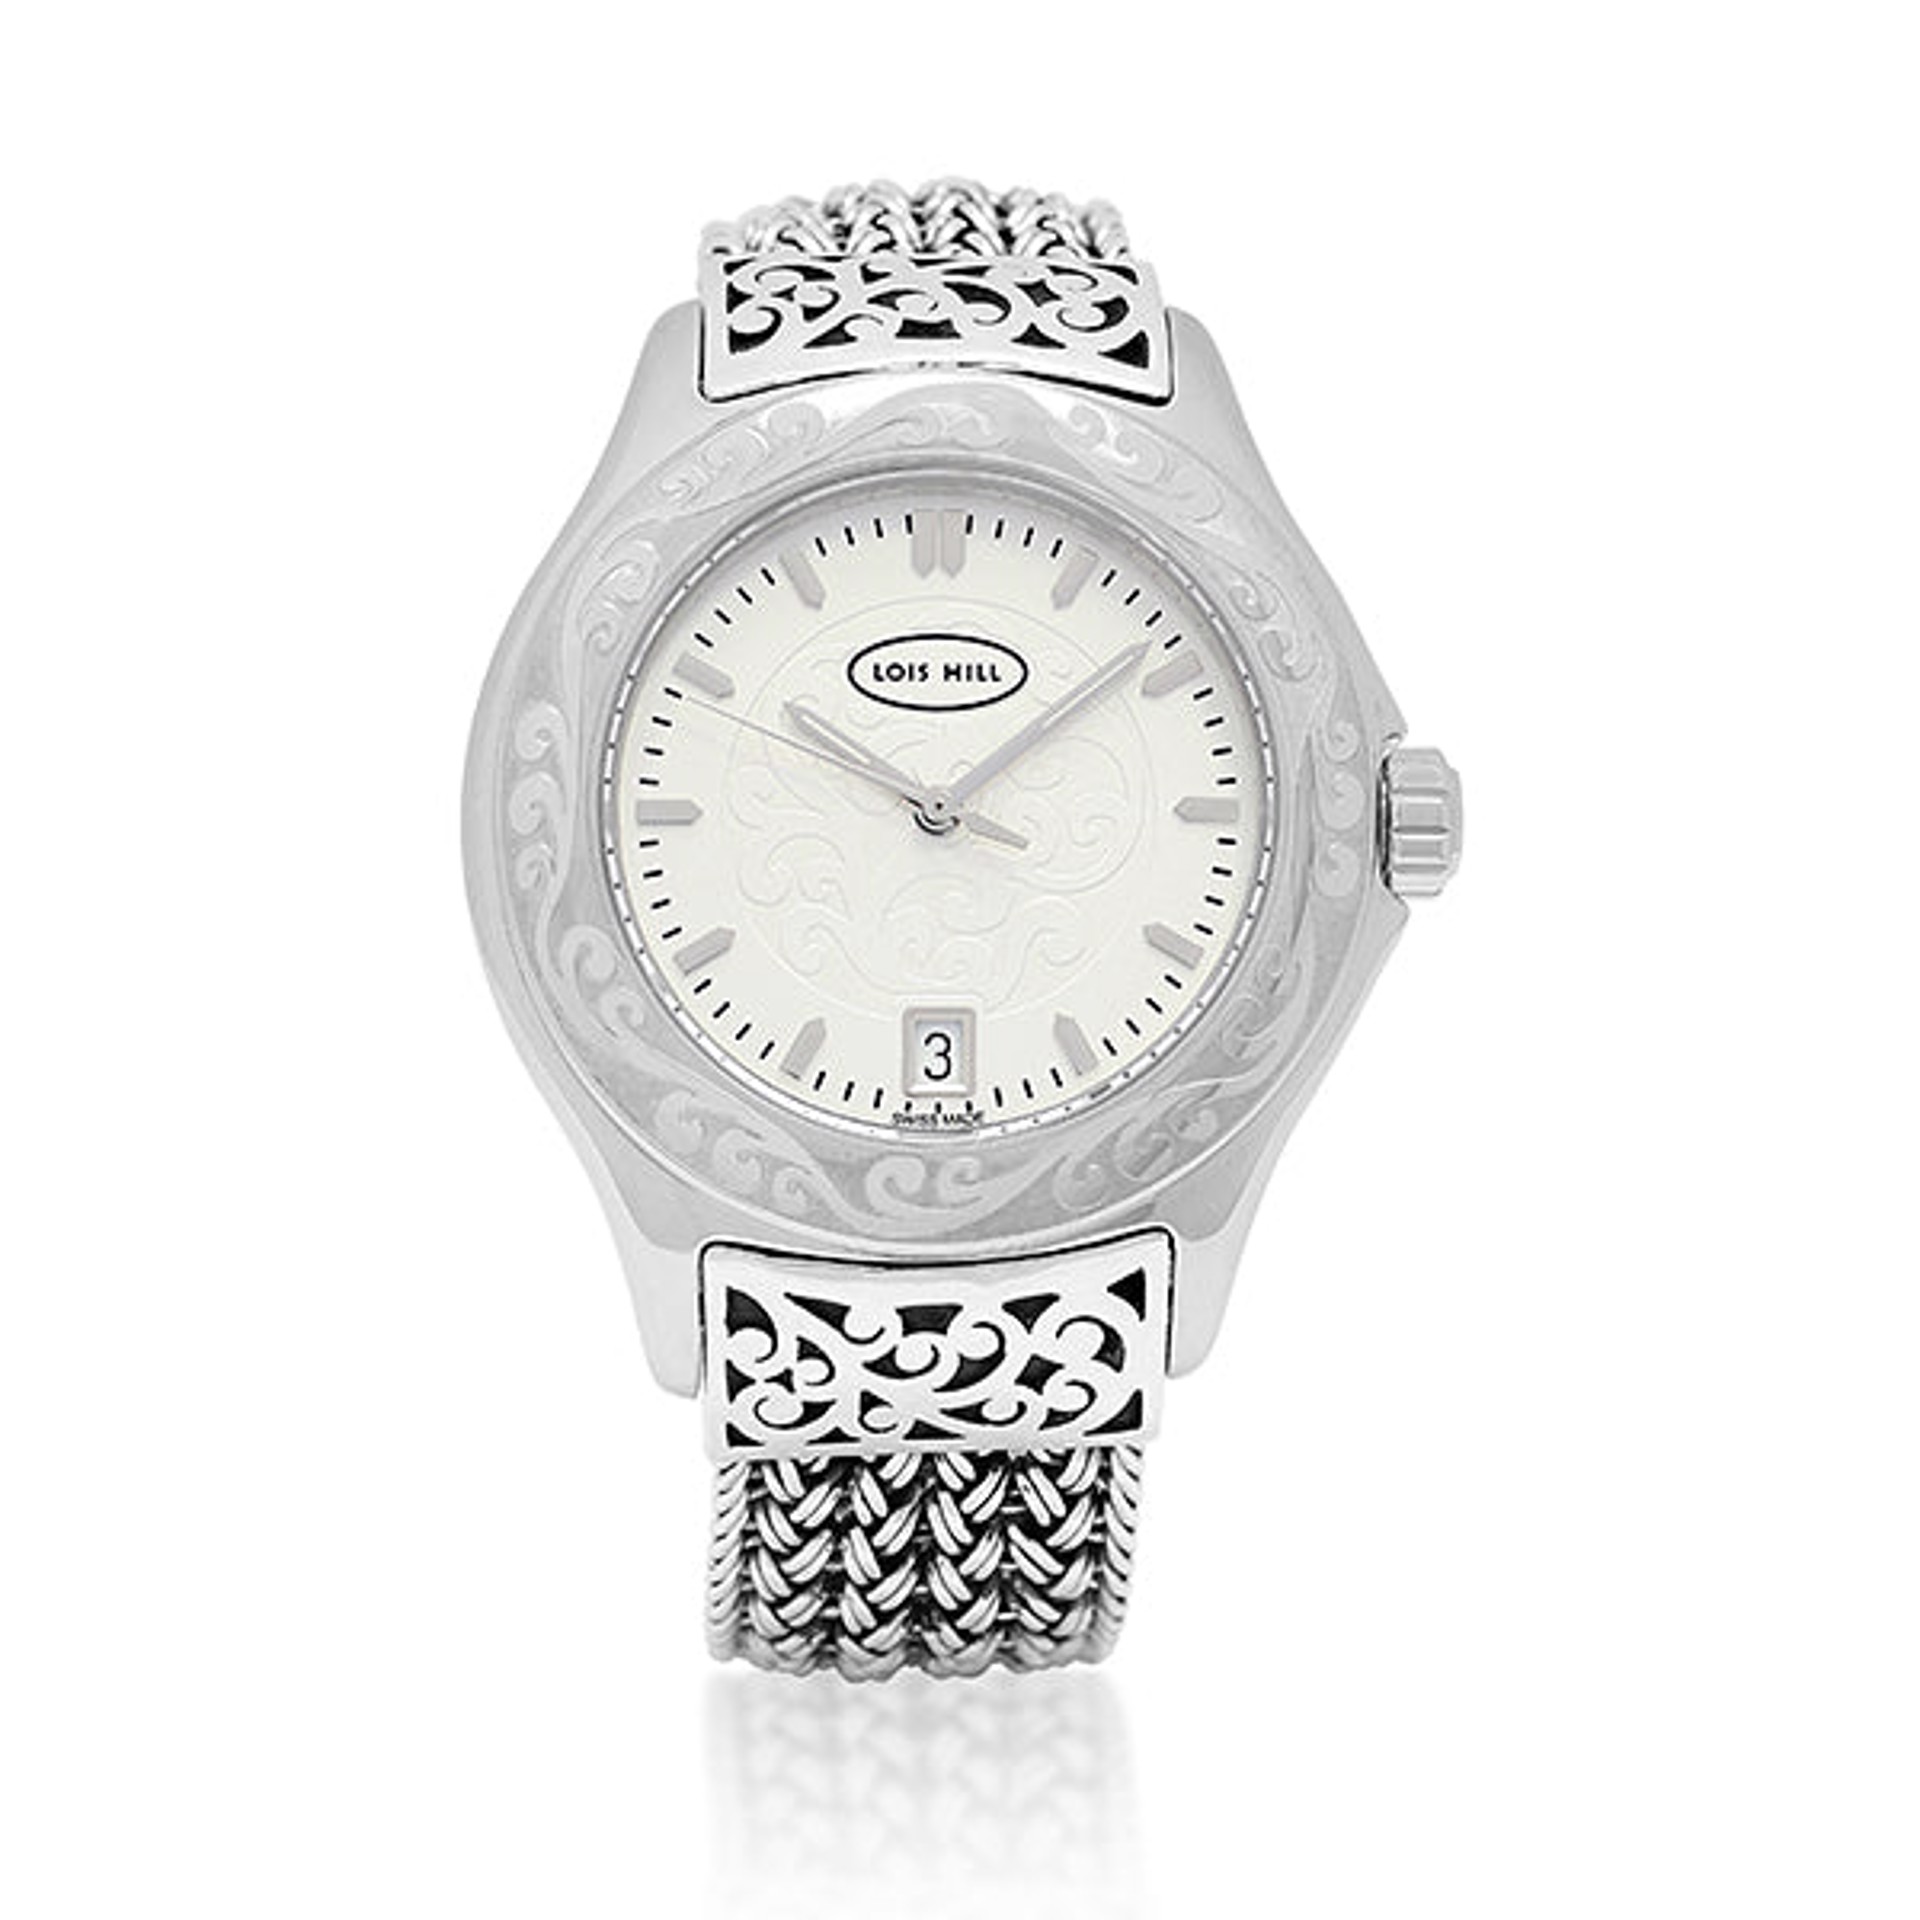 9761 LH Scroll Engraved Round Bezel Watch with Sterling Silver Handwoven Textile Weave Band Hand Carved Scroll Edges by Lois Hill